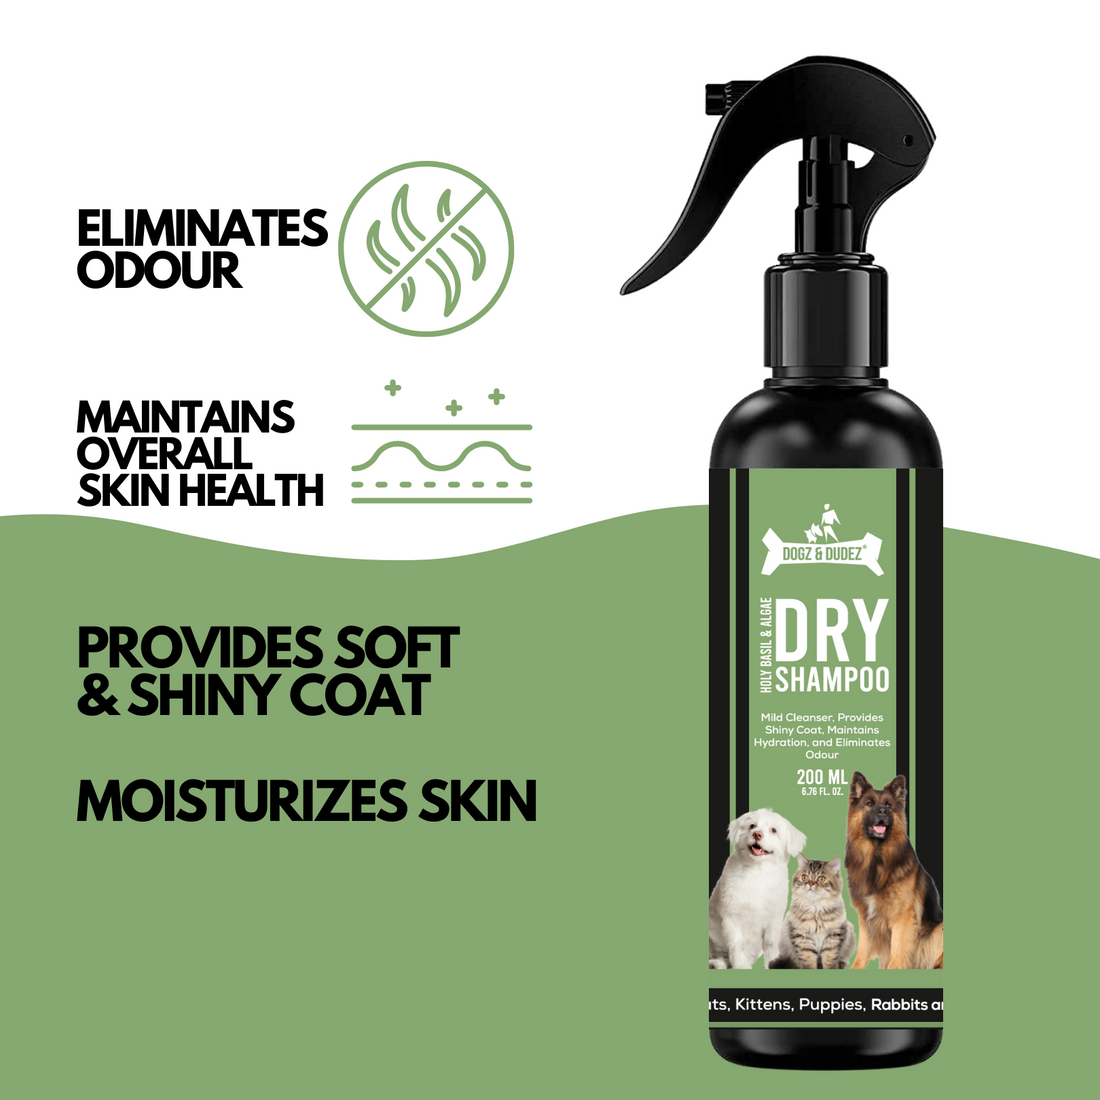 Dogz & Dudez Holy Basil & Algae Dry Shampoo for Dogs & Cats (200 ML)Removes Dirt, Hydrates Skin With Algae Extract to Moisturize skin, provide anti bacterial barrier and Holy Basil for Anti Inflammation | Provides Clean and Shiny Coat